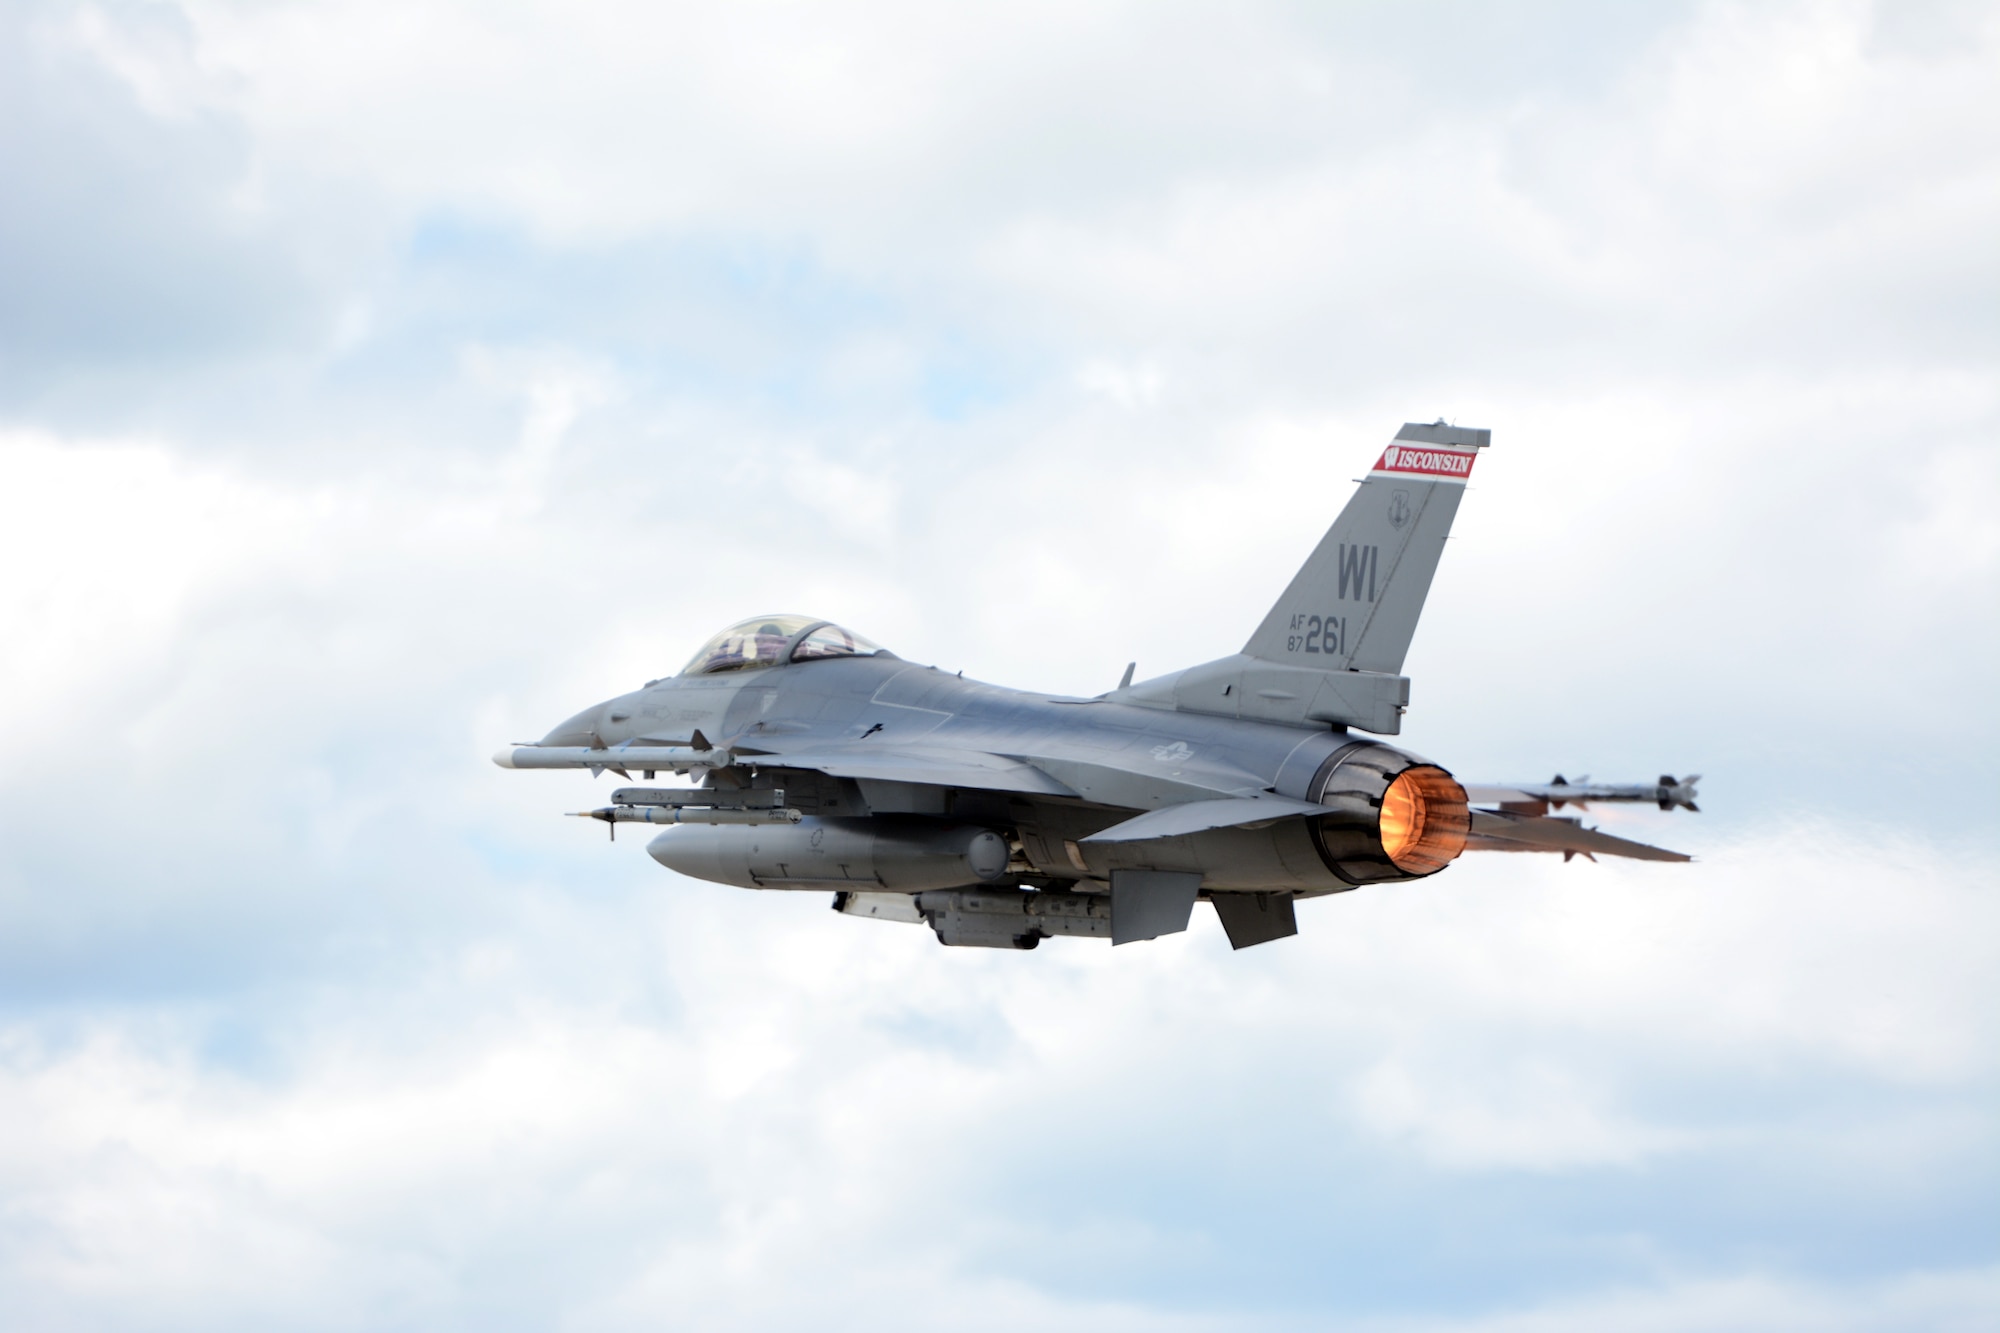 An F-16 Fighting Falcon from the 115th Fighter Wing in Madison, Wis., takes off above Volk Field Air National Guard Base, Wis., July 16, 2014. The jets were moved to Volk Field for the month of July, while the Dane County Regional Airport completed runway maintenance and repairs. (Air National Guard photo by Senior Airman Andrea F. Liechti)